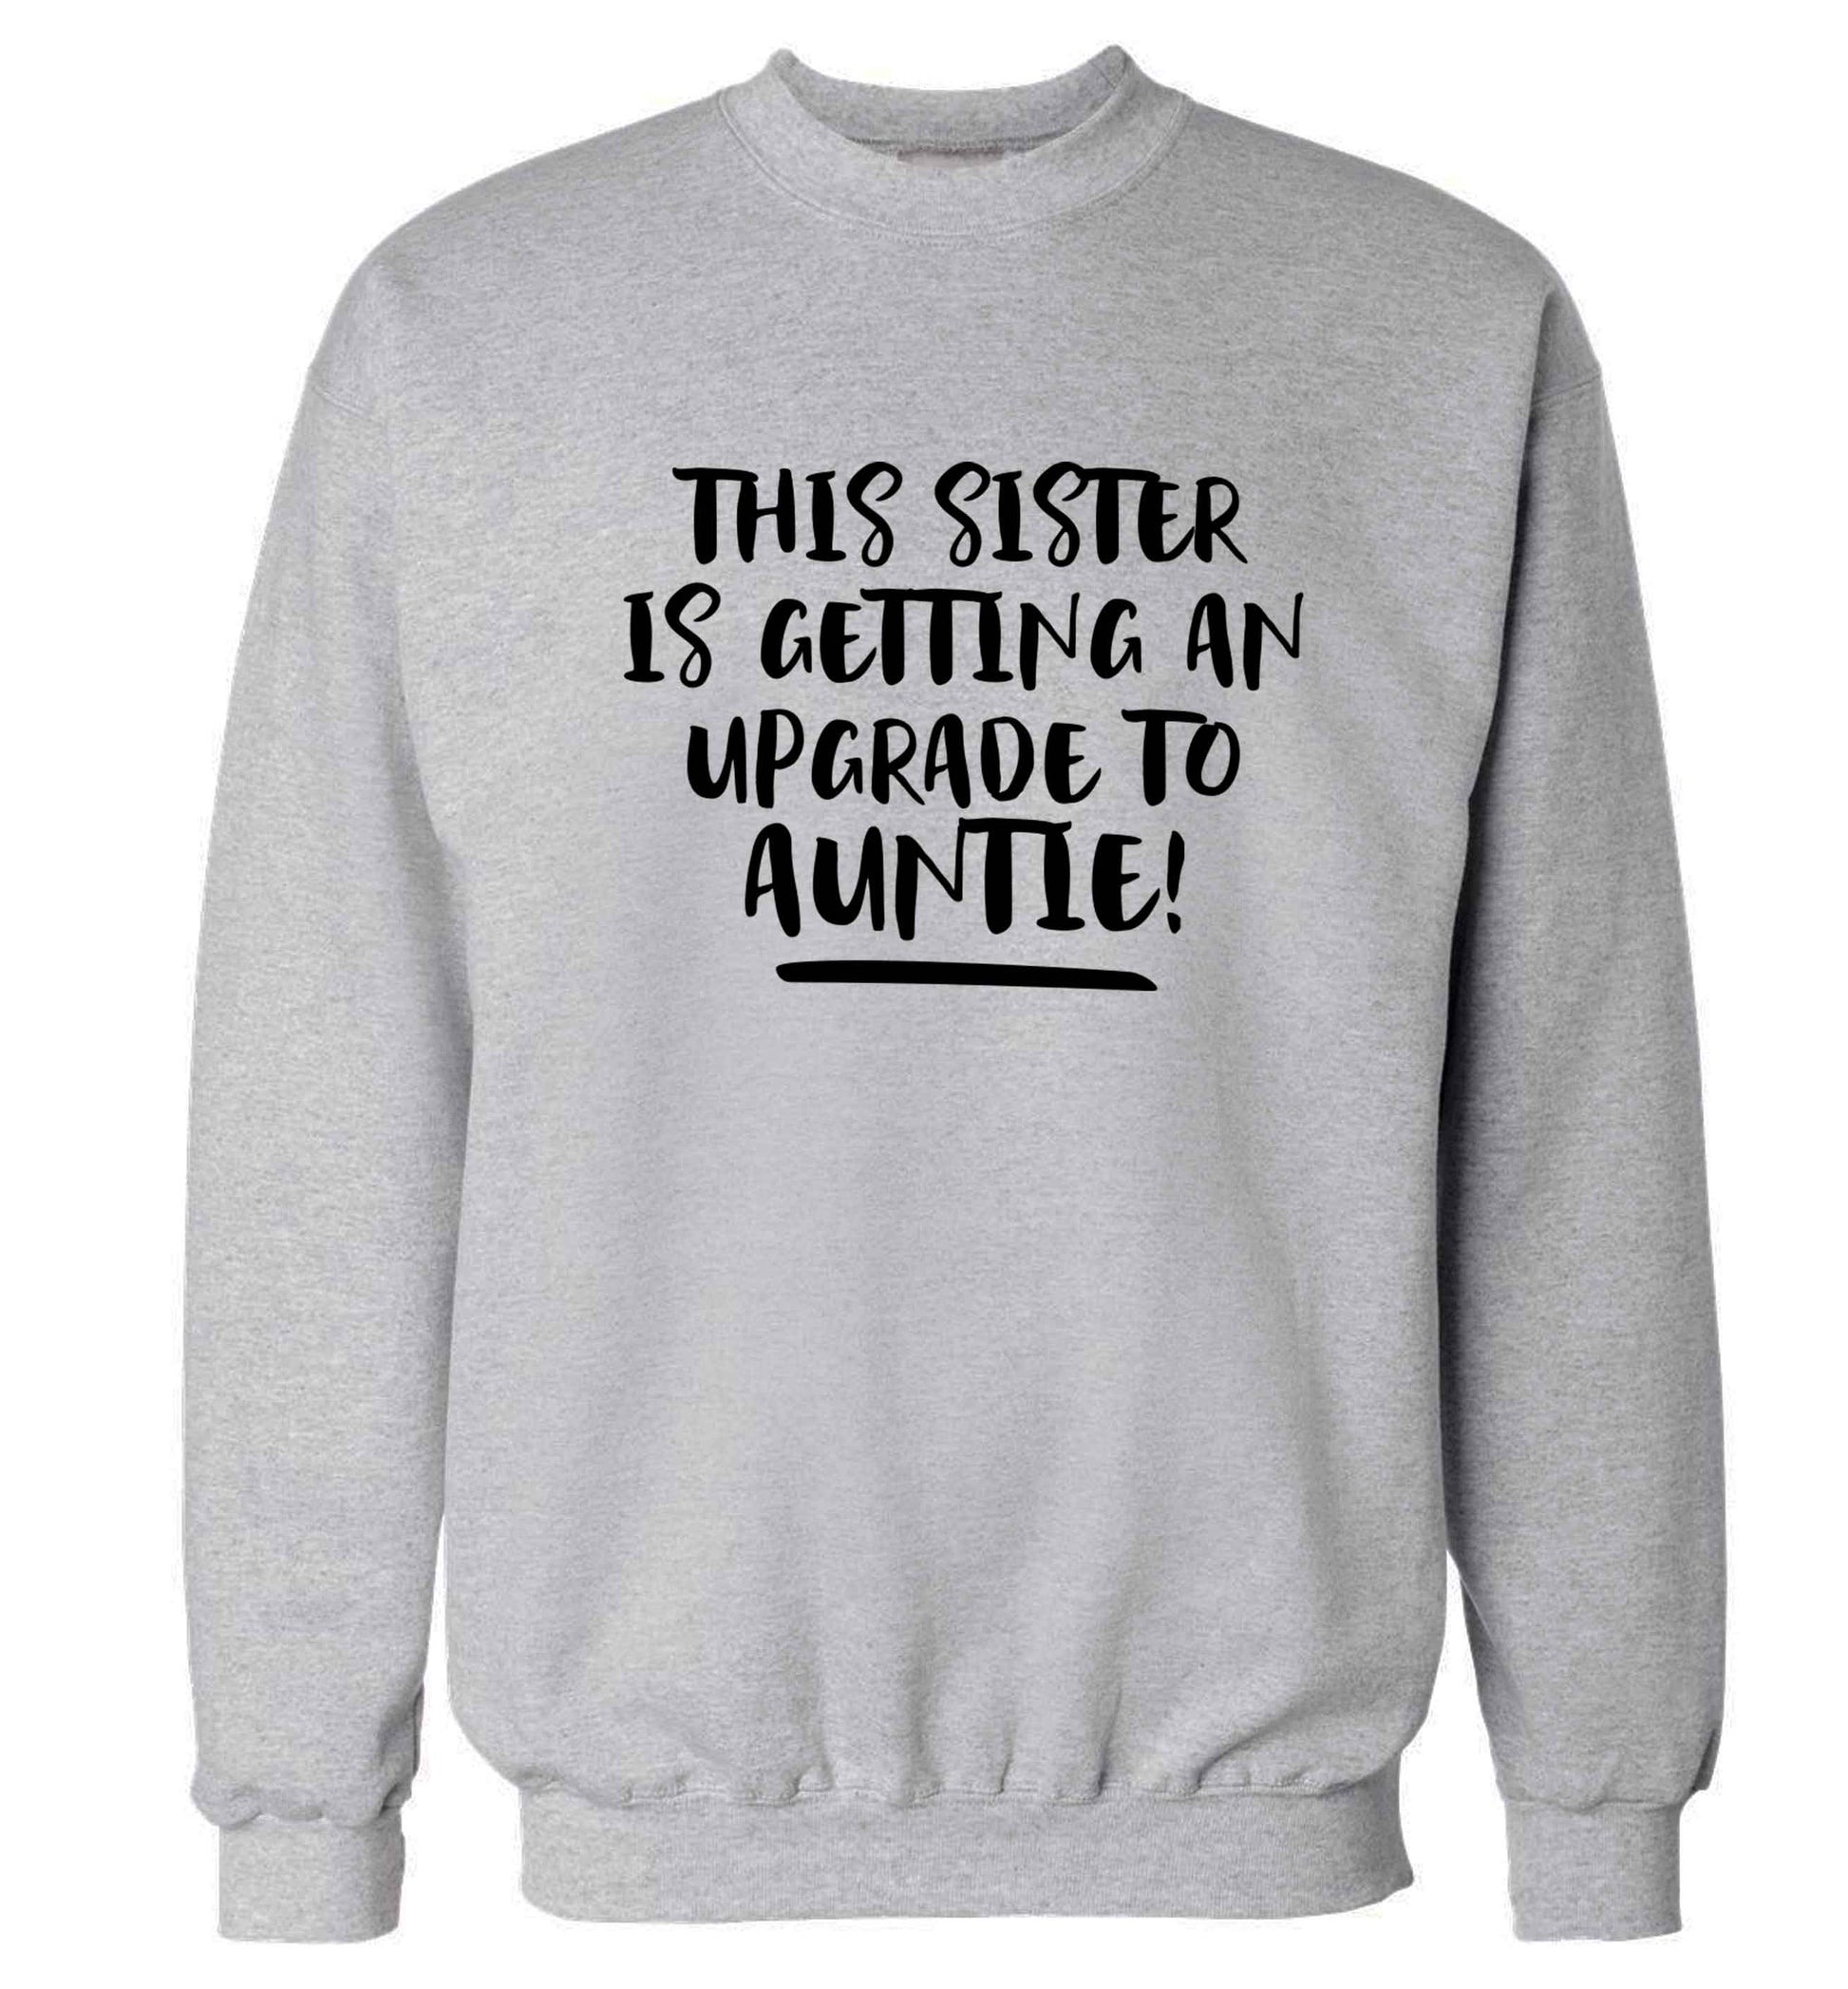 This sister is getting an upgrade to auntie! Adult's unisex grey Sweater 2XL